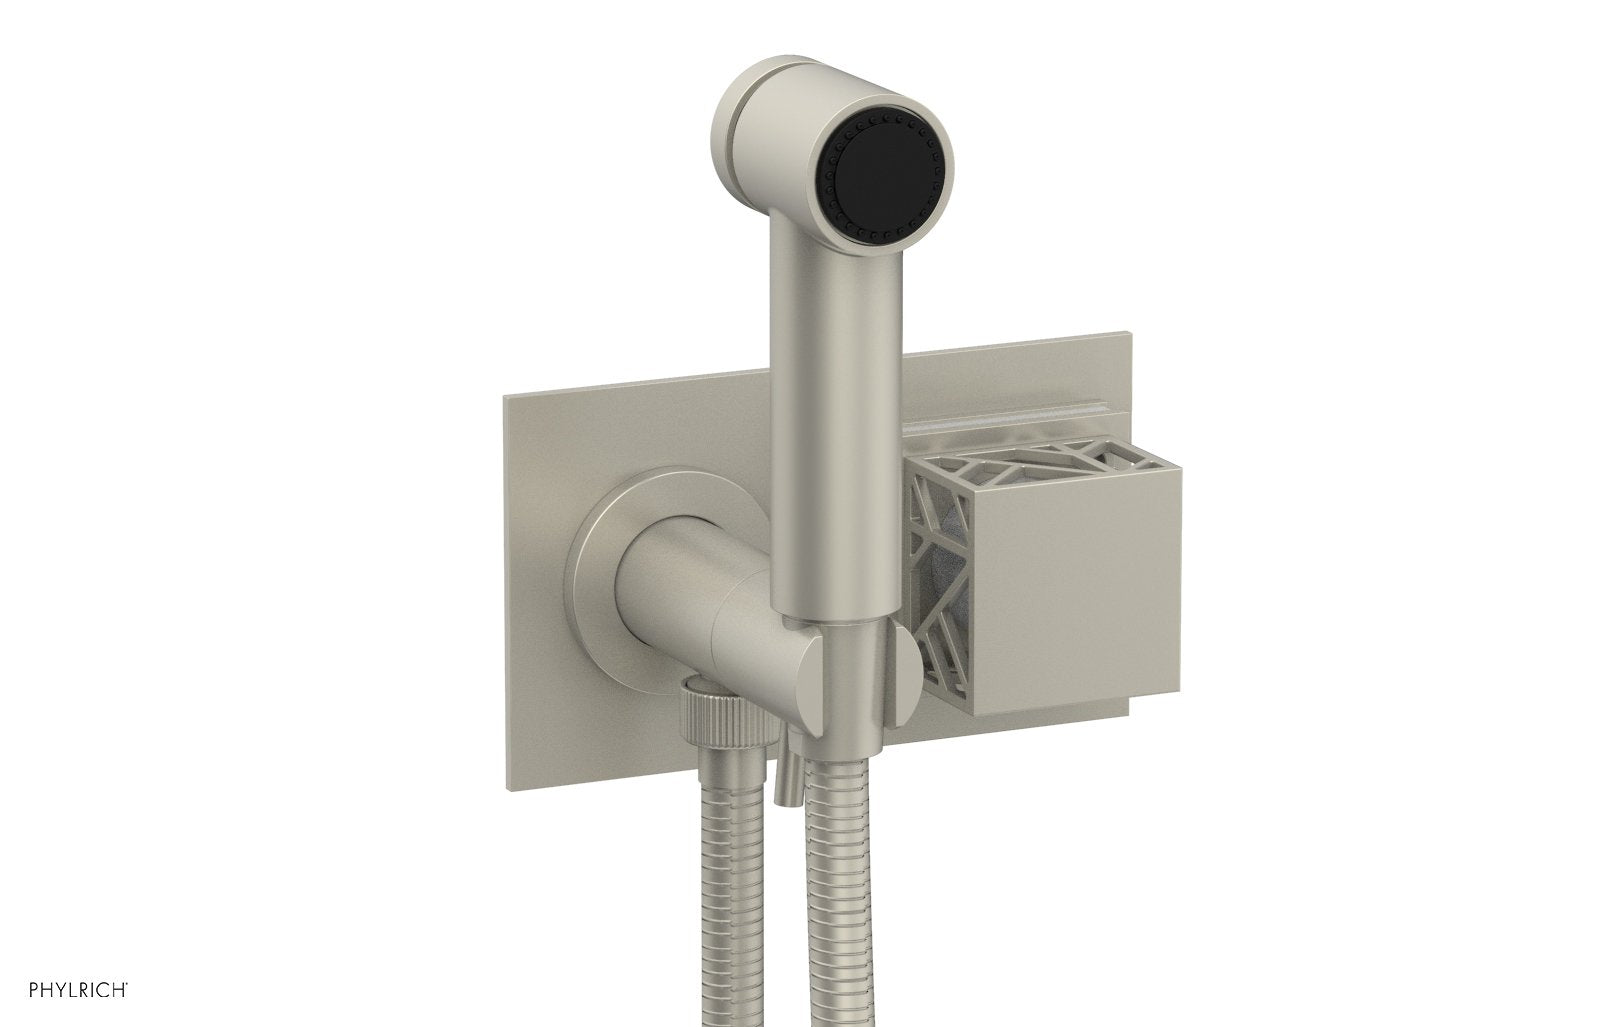 Phylrich JOLIE Wall Mounted Bidet, Square Handle with "White" Accents